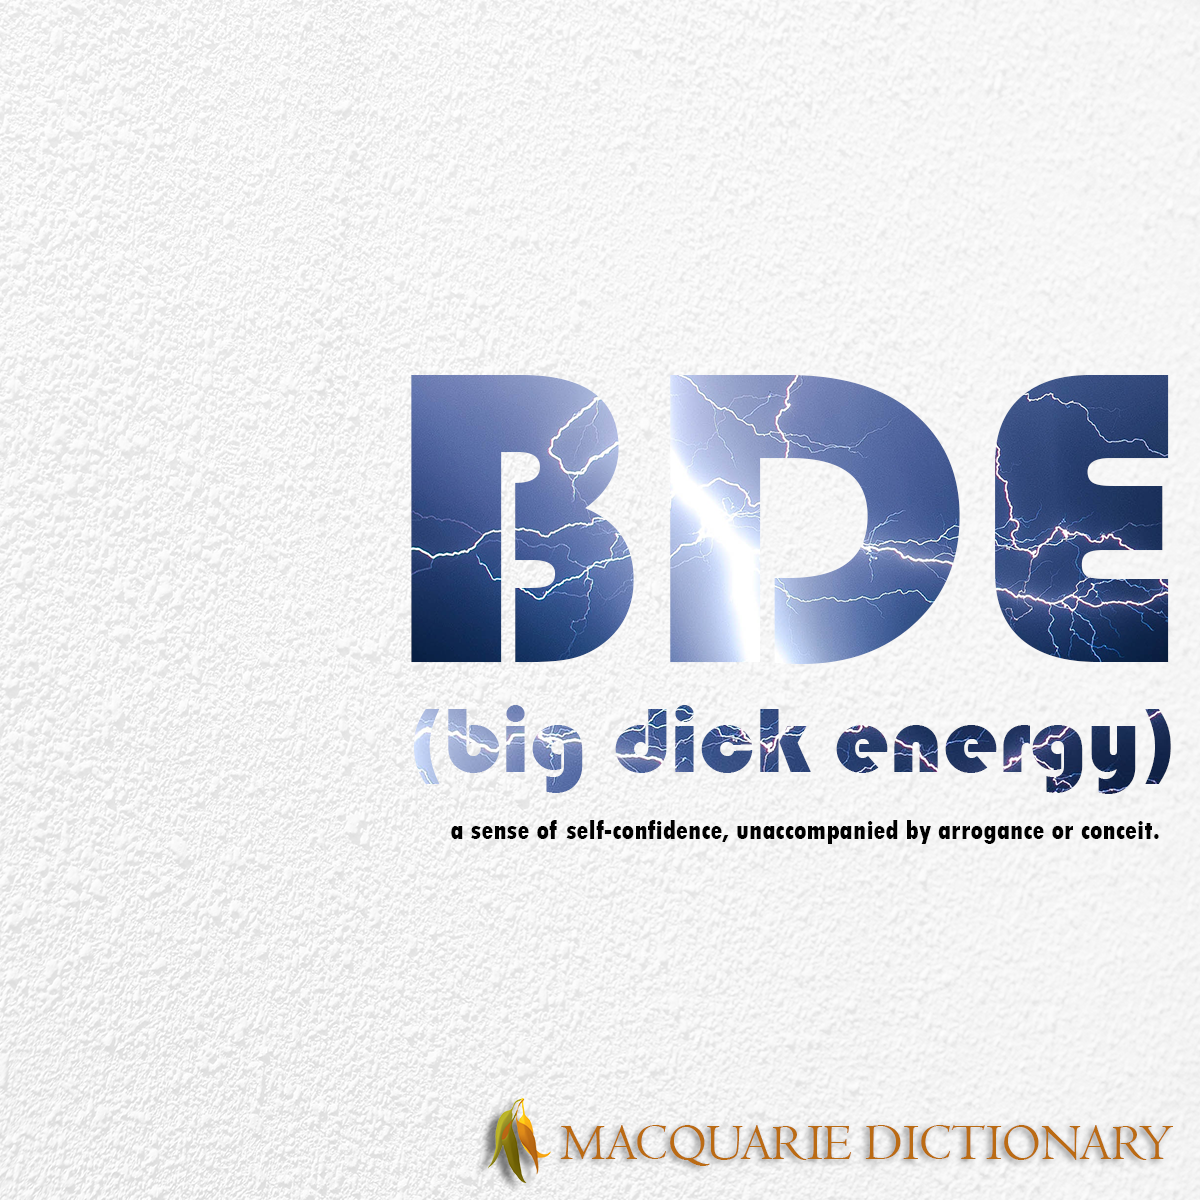 Image of Macquarie Dictionary Word of the Year - BDE (big dick energy) a sense of self-confidence, unaccompanied by arrogance or conceit. 